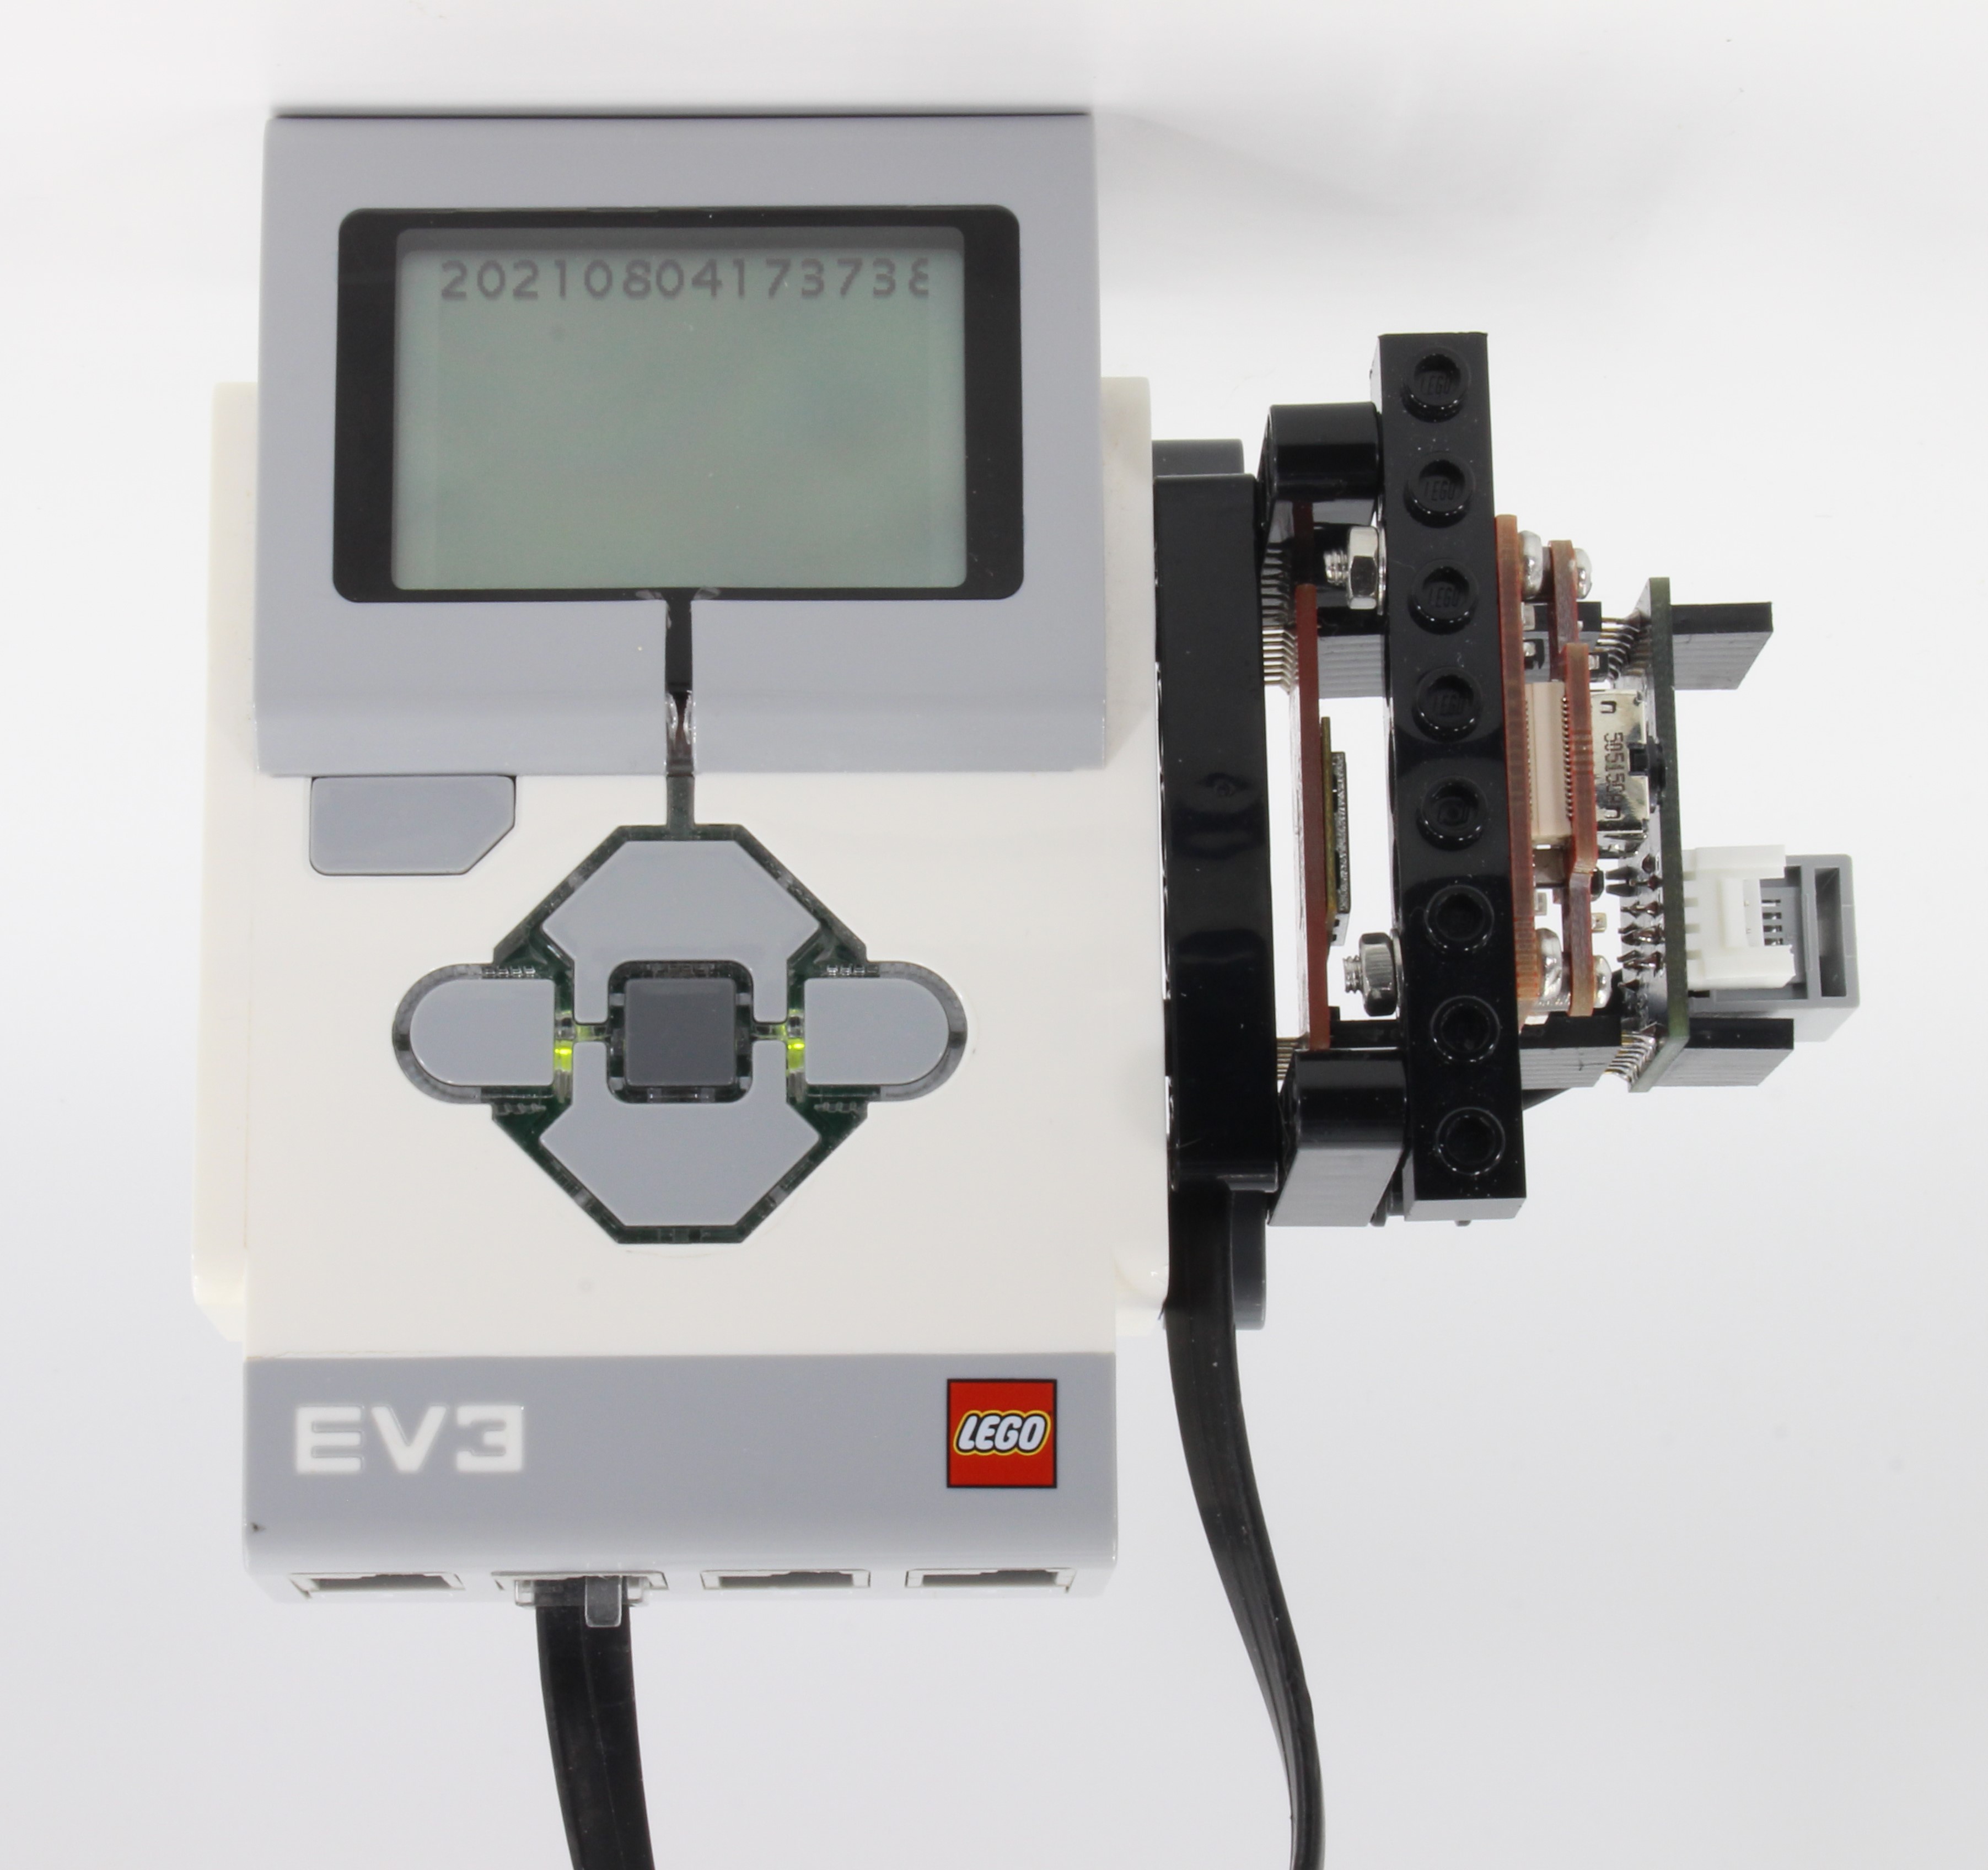 date and time displayed on EV3 Intelligent Brick